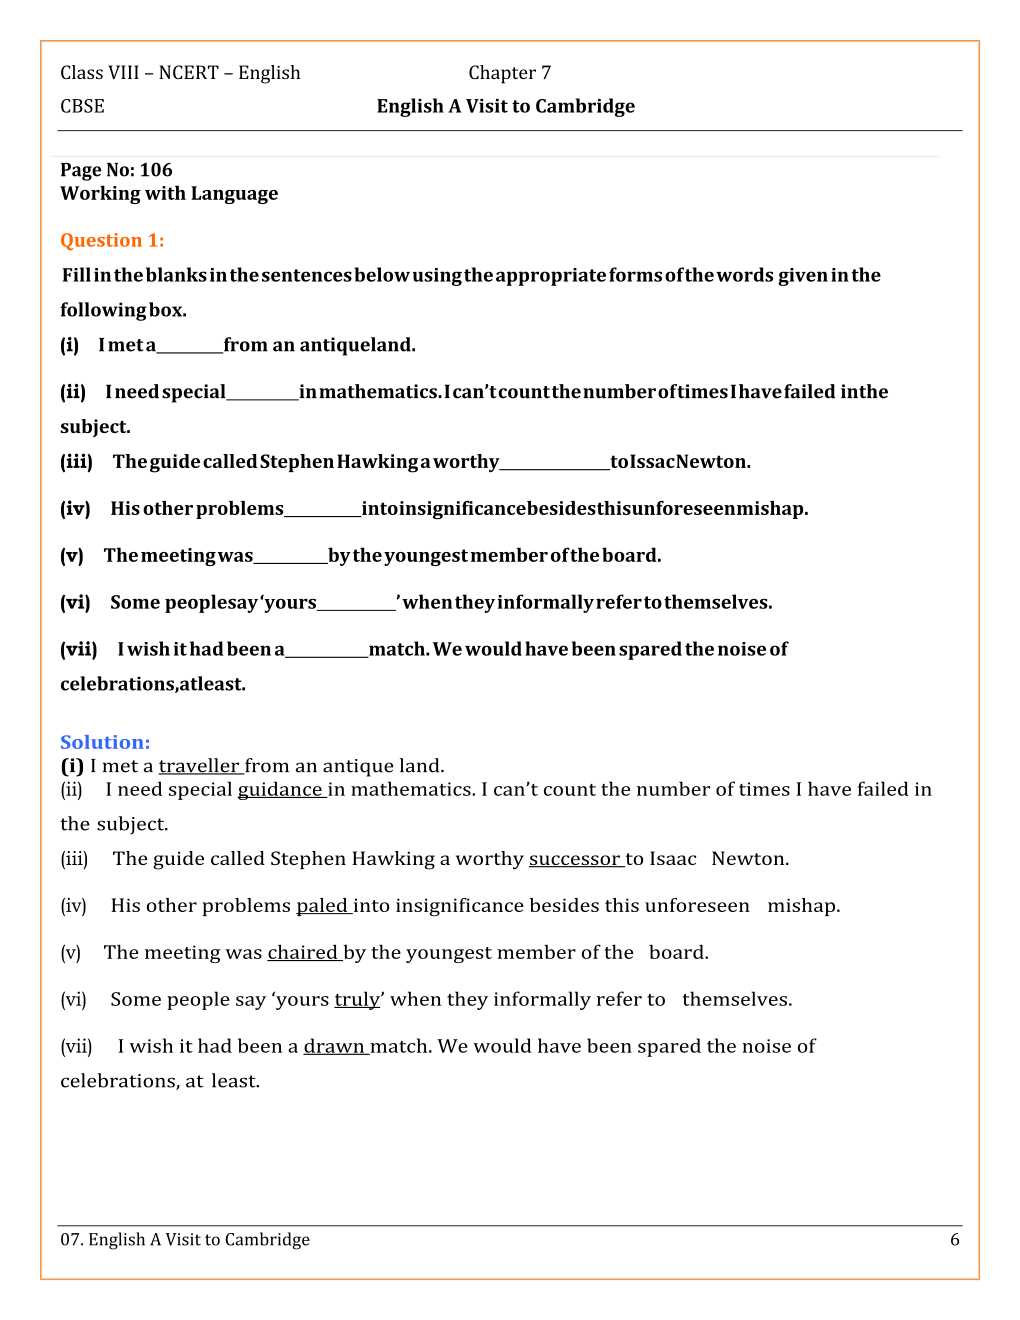 NCERT Solutions For Class 8 English Honey Dew Chapter 7 